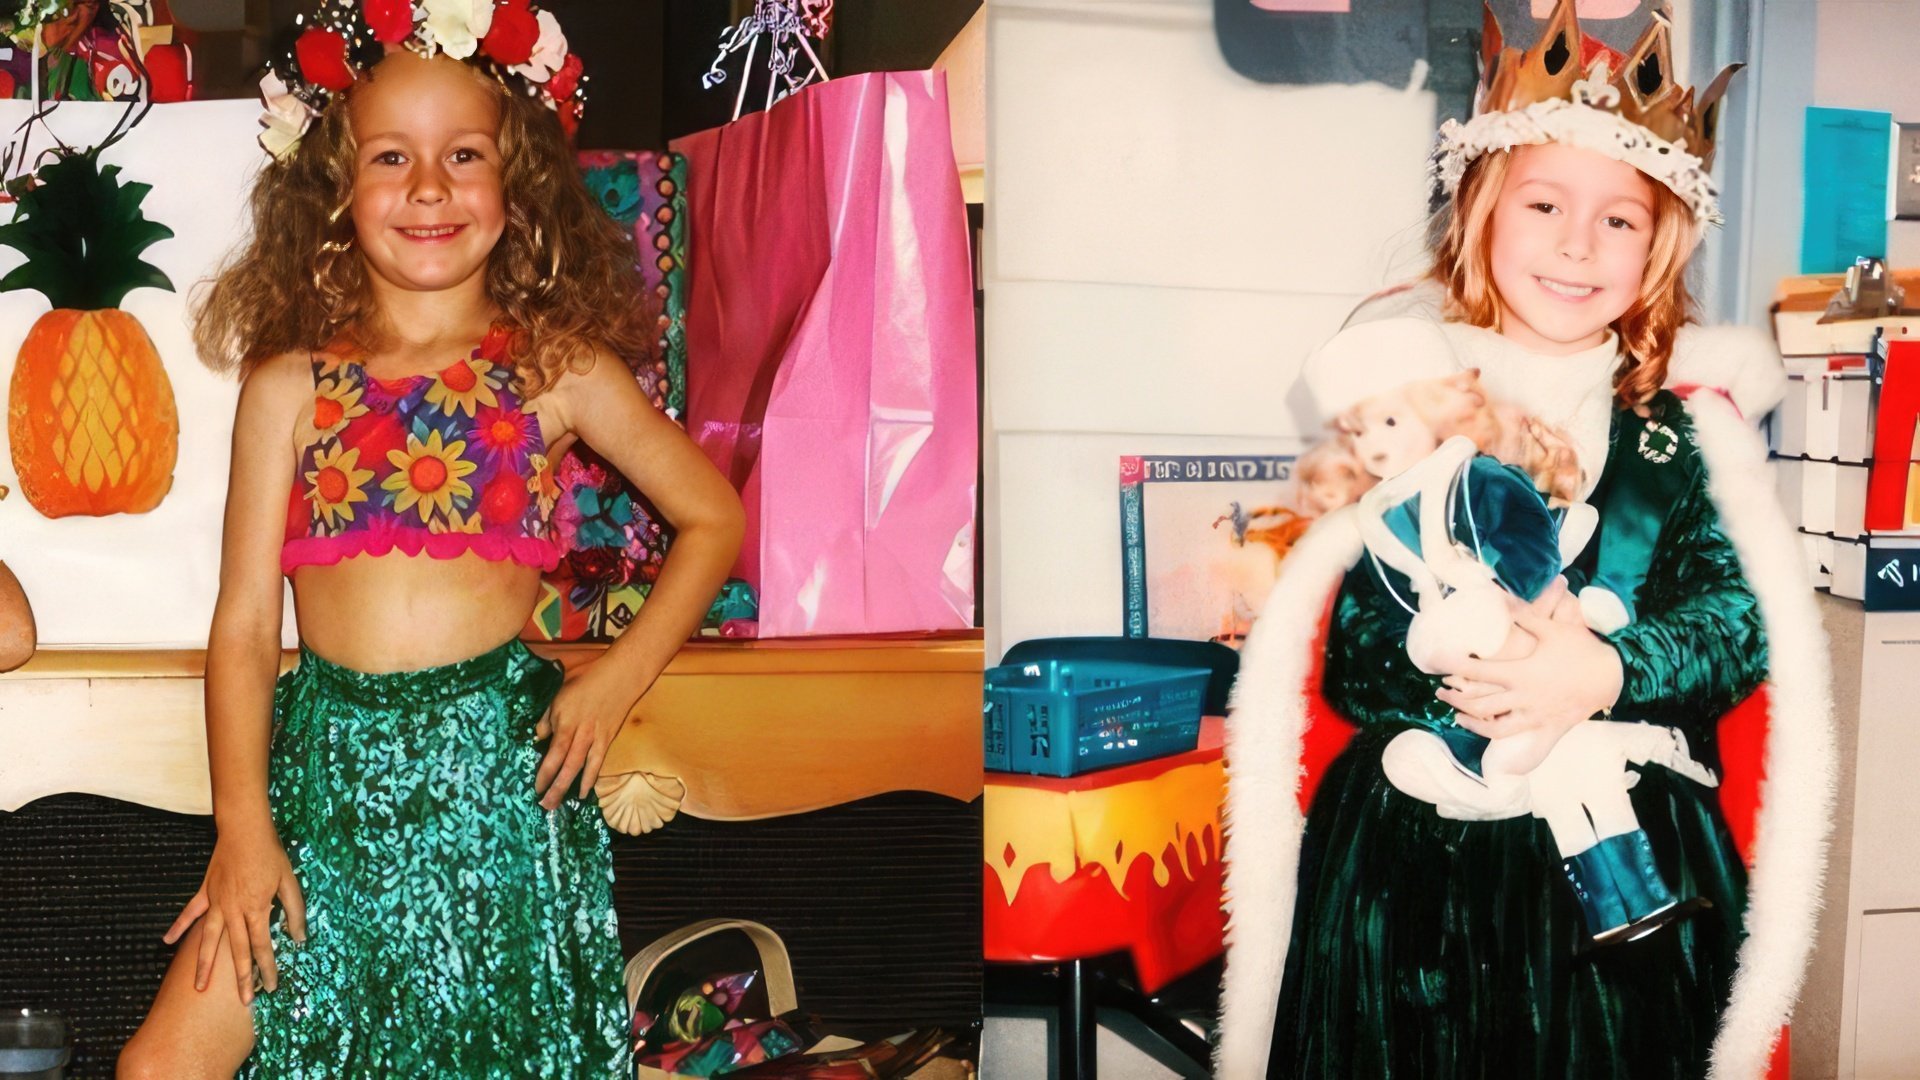 Brie Larson Has Been Showing Her Acting Talent Since Childhood